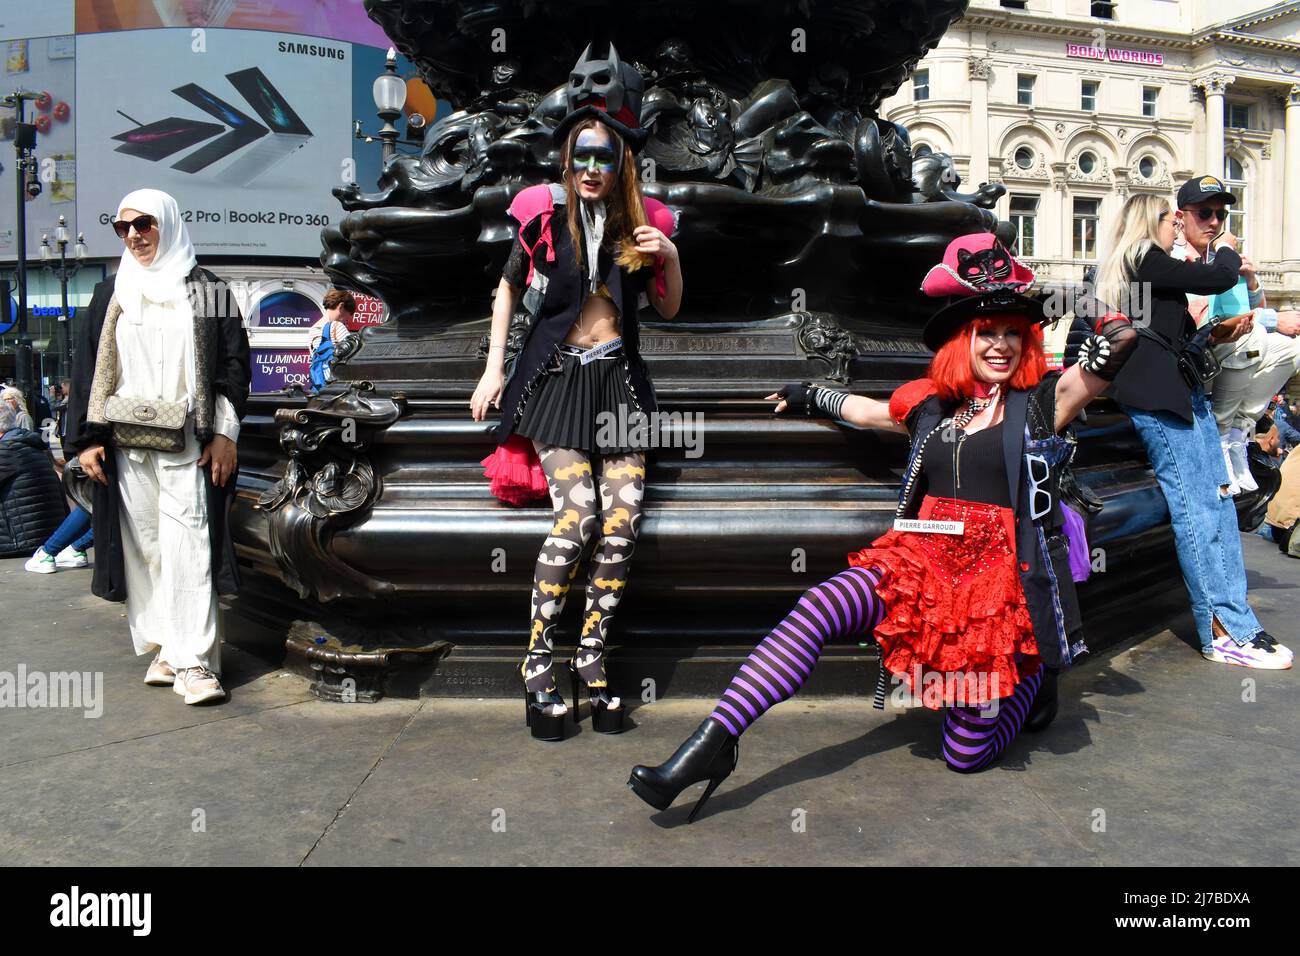 London, UK, 7 May 2022 Pierre Garroudi fashion flash mob at Piccadilly Circus on the Eros statue. West end busy on sunny weekend. Credit: JOHNNY ARMSTEAD/Alamy Live News Stock Photo